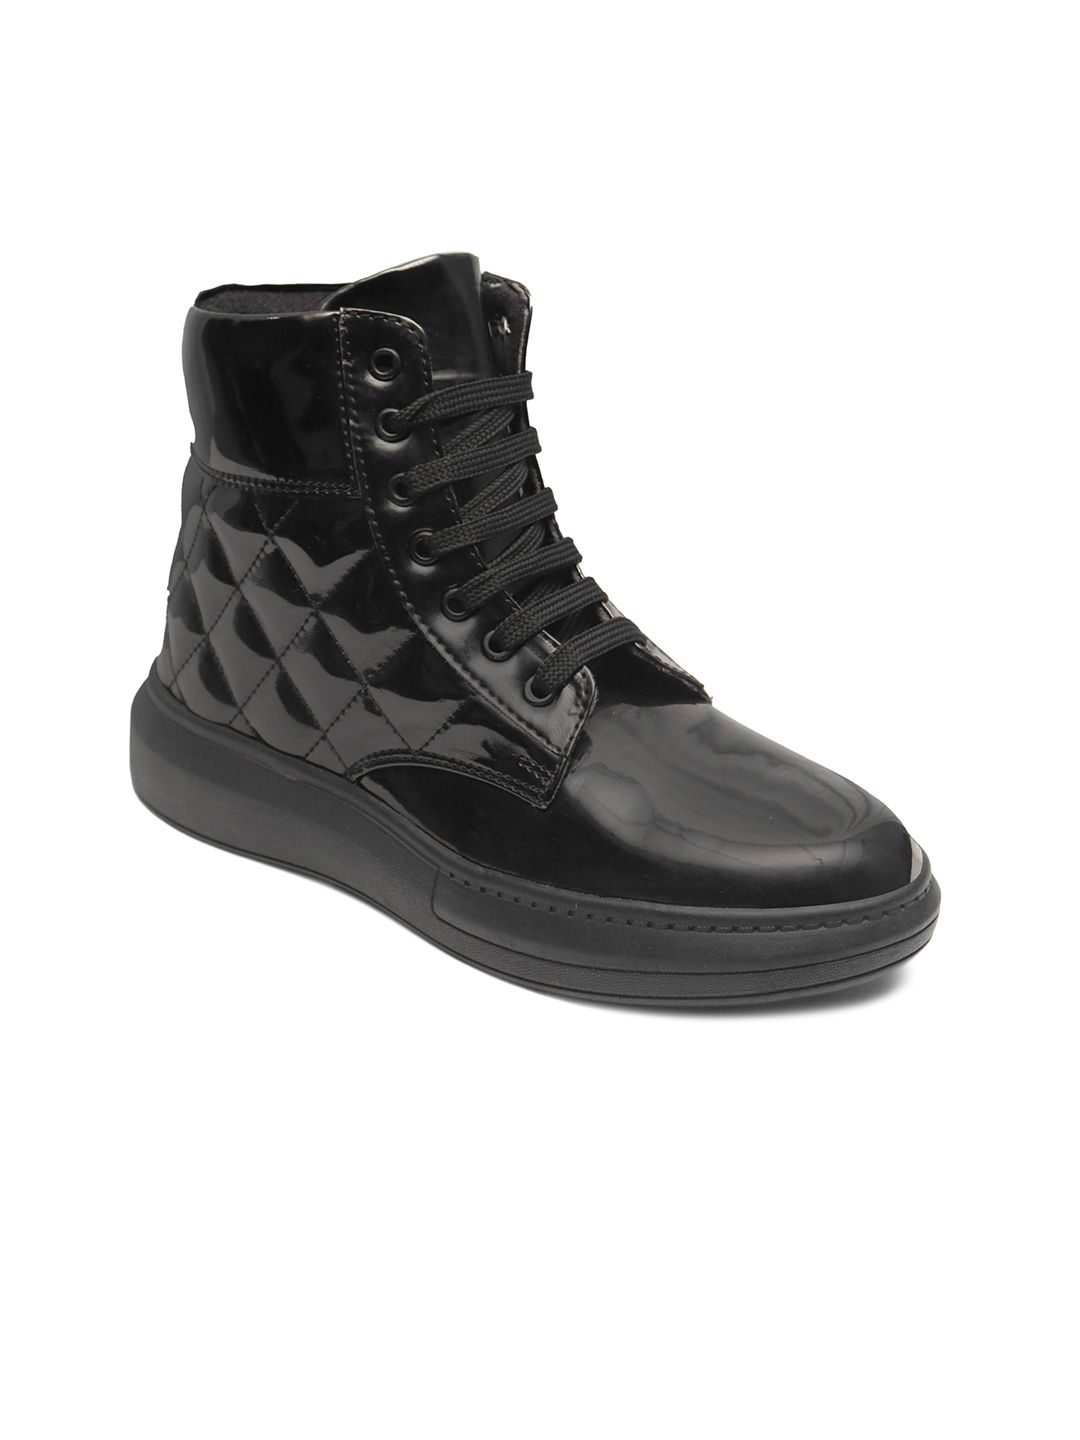 AfroJack Women Black Textured Mid-Top Flat Boots Price in India